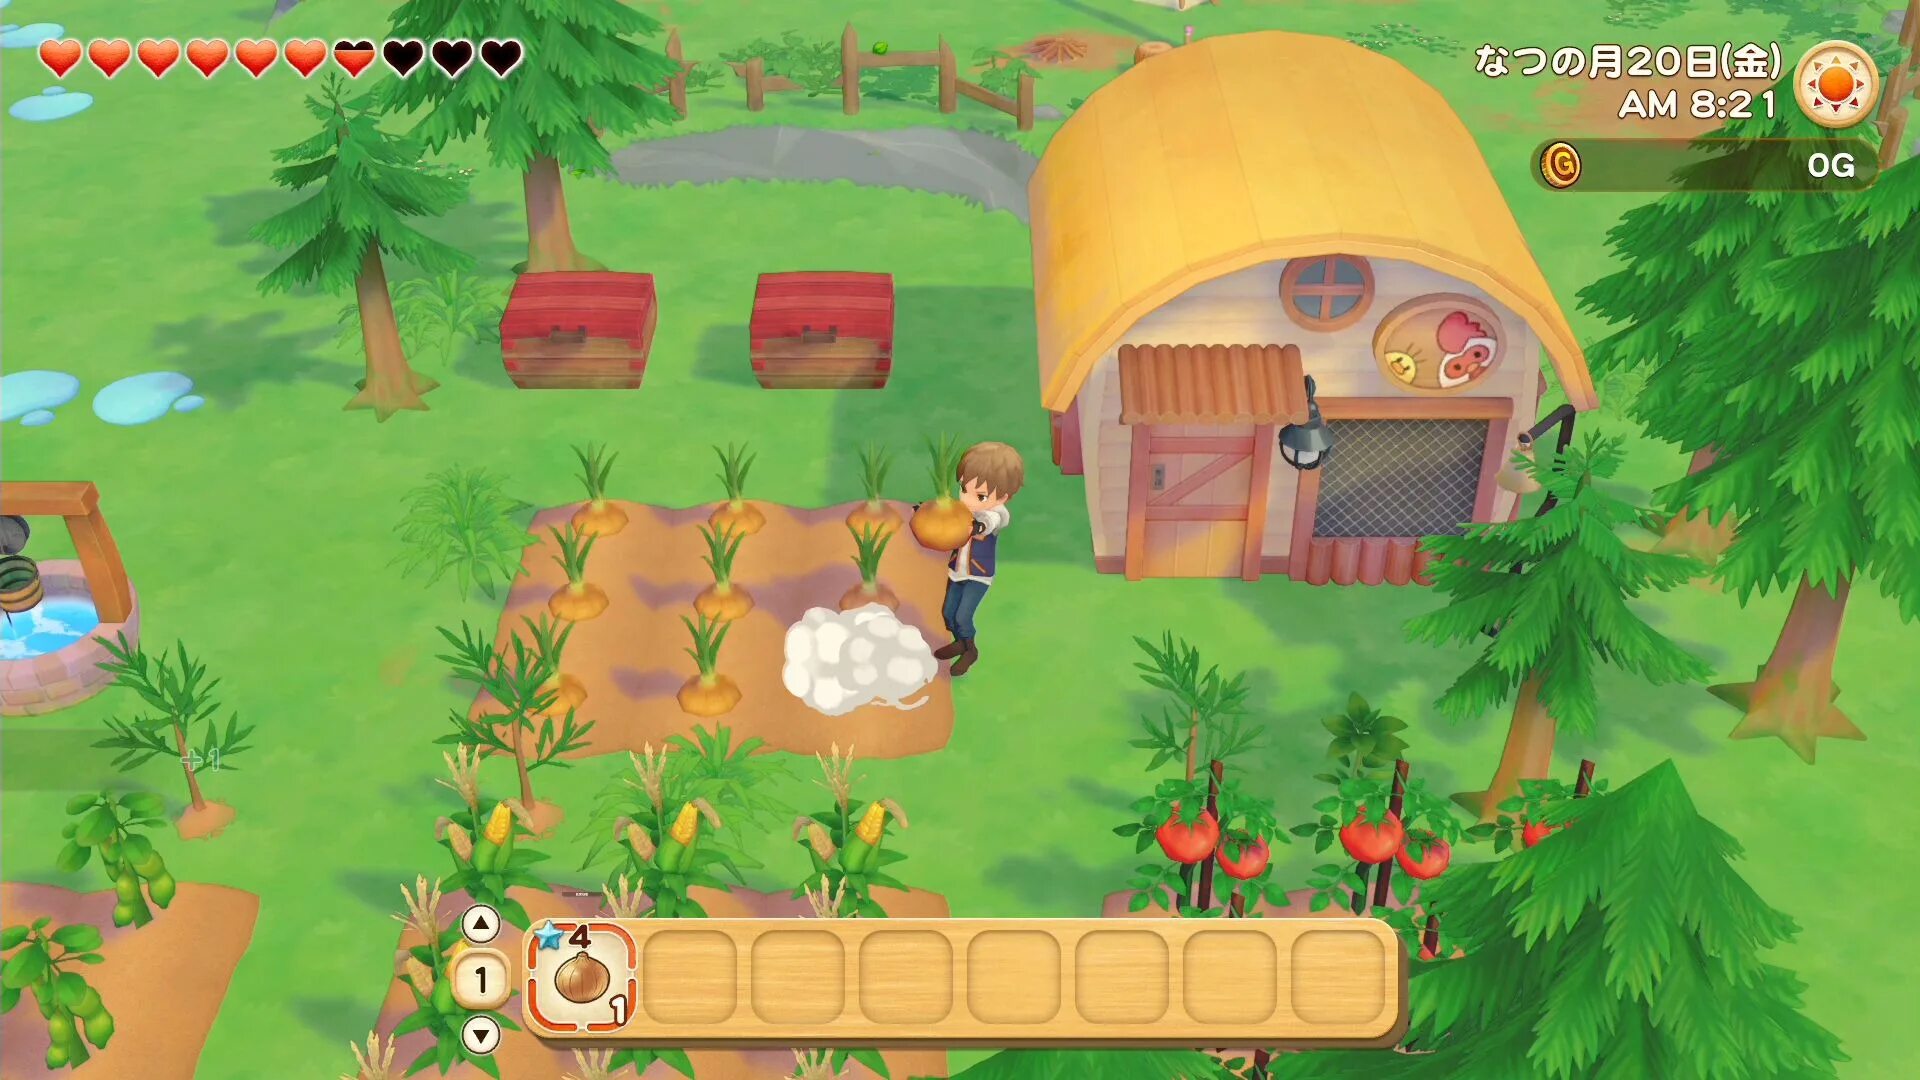 Story of Seasons: Pioneers of Olive город. Story of Seasons Pioneers of Olive Town персонажи. Story of Seasons: Pioneers of Olive Town Скриншоты. Story of Seasons Pioneers of Olive Town [NSZ]. Просто игра рассказ